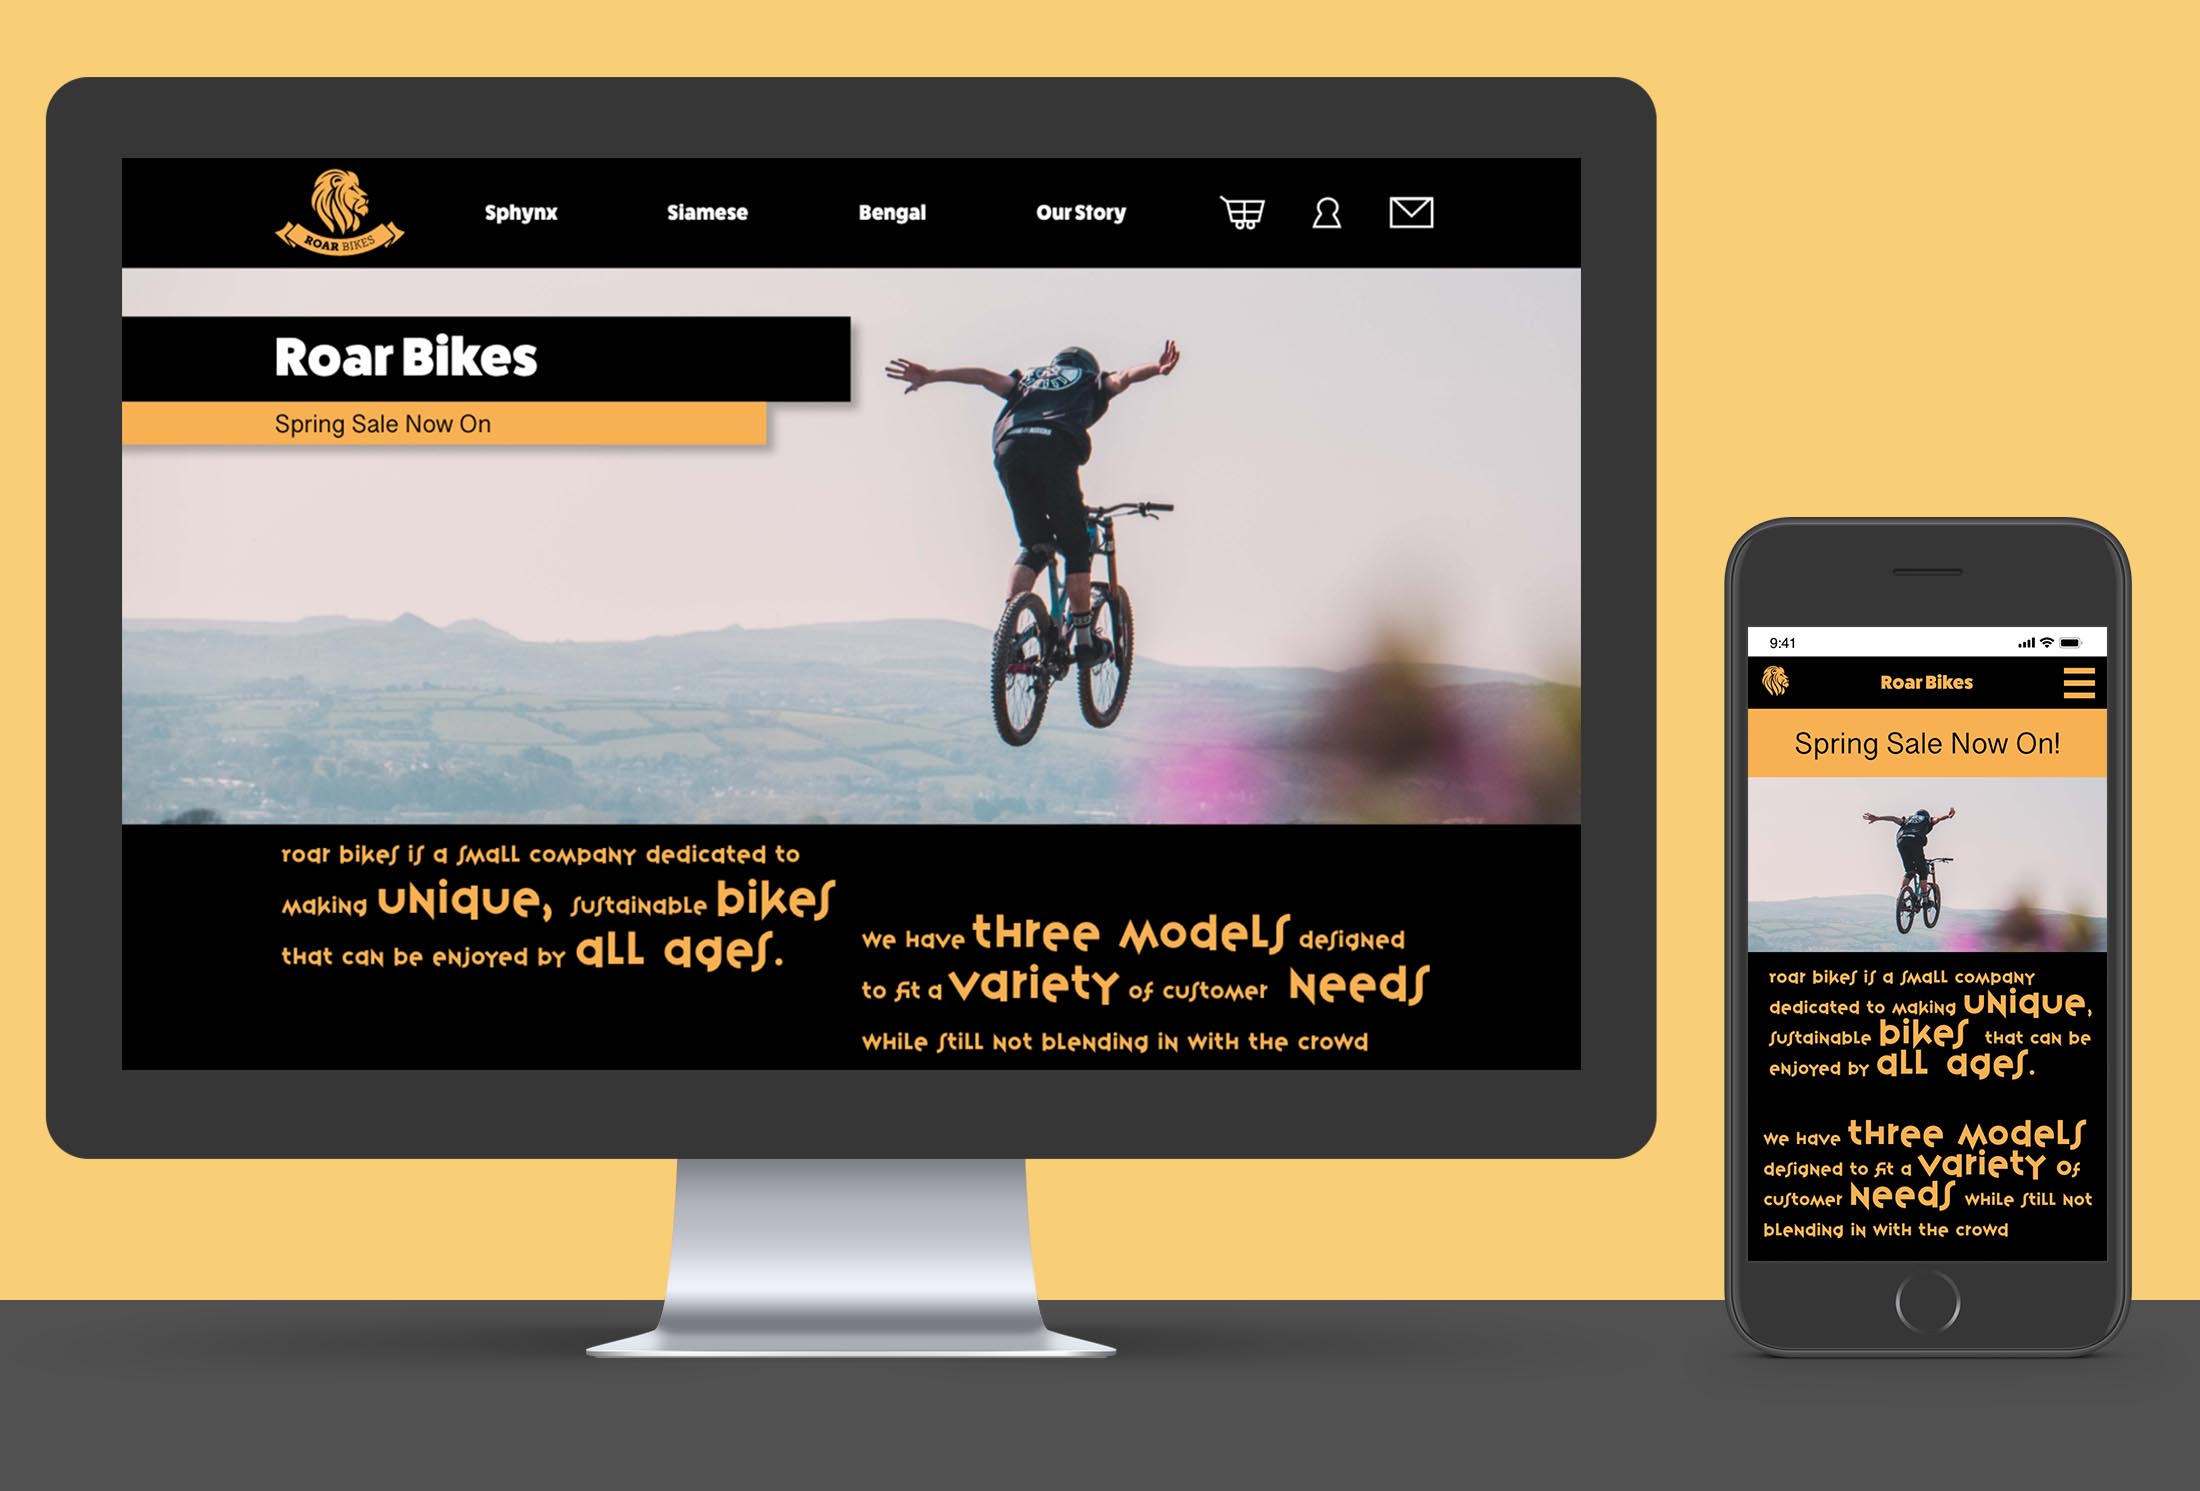 Top of Roar Bikes home page on devices.